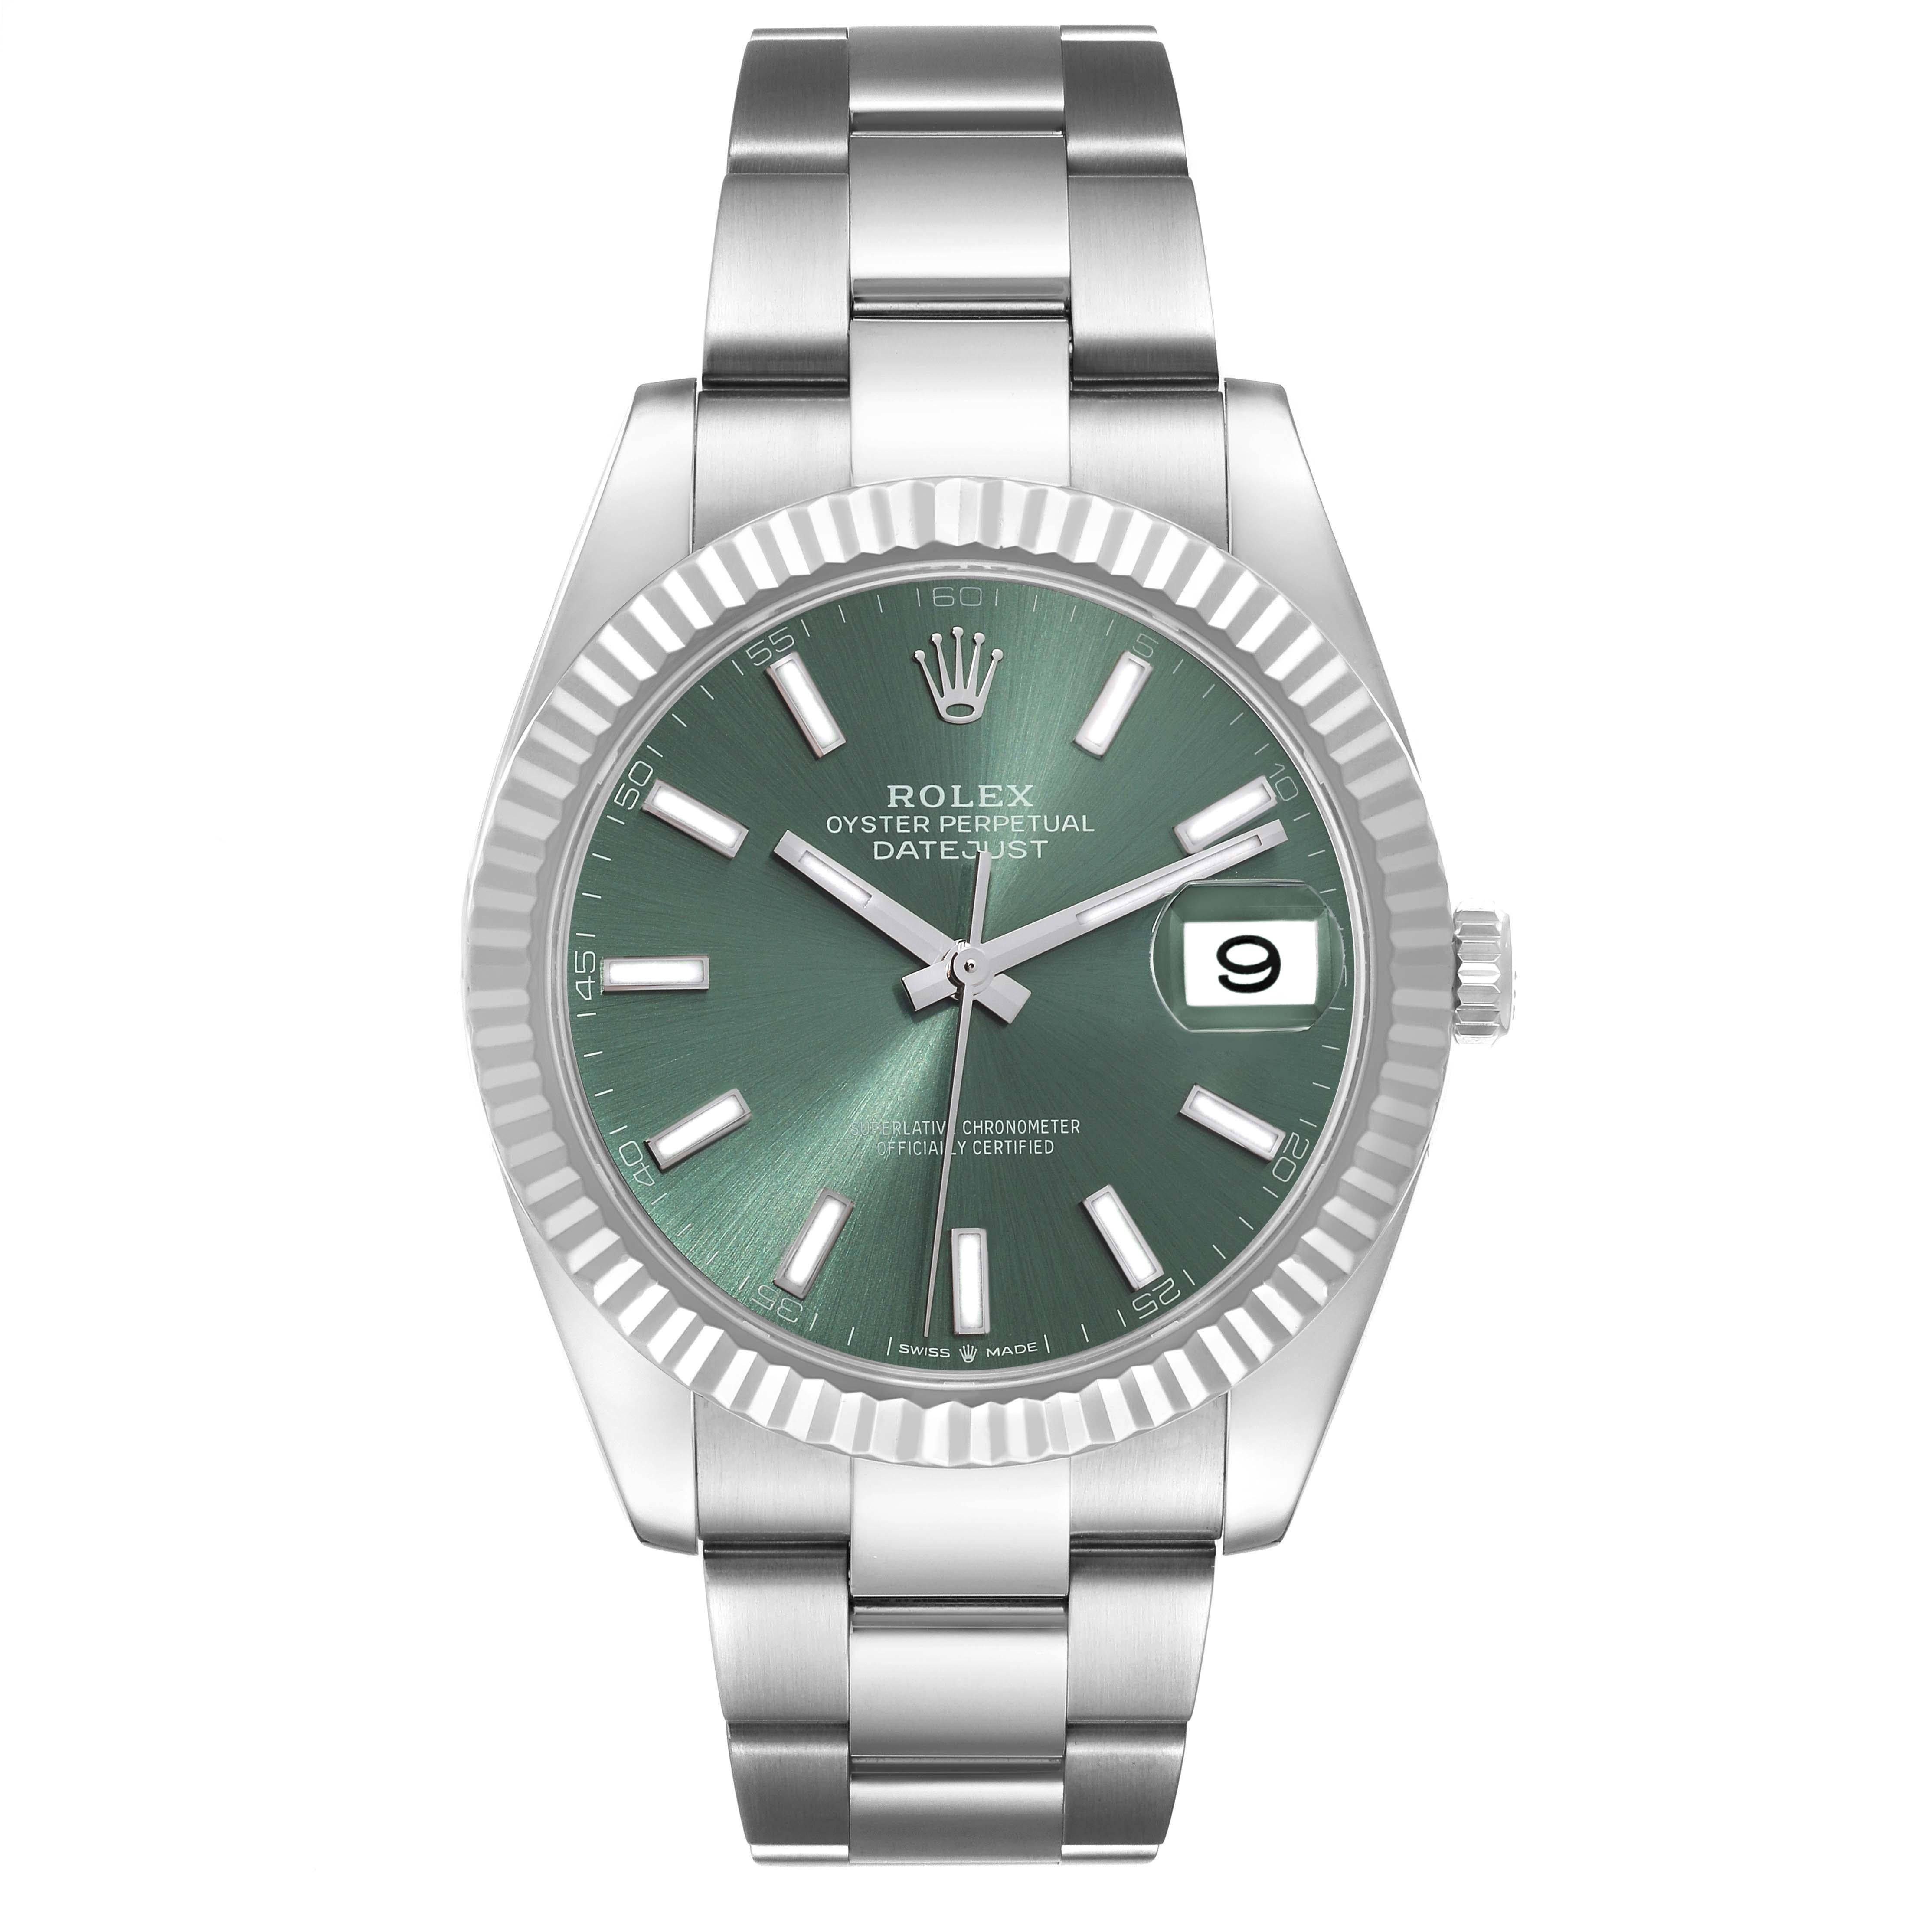 Rolex Datejust 41 Steel White Gold Mint Green Dial Mens Watch 126334. Officially certified chronometer automatic self-winding movement. Stainless steel case 41 mm in diameter. Rolex logo on a crown. 18k white gold fluted bezel. Scratch resistant